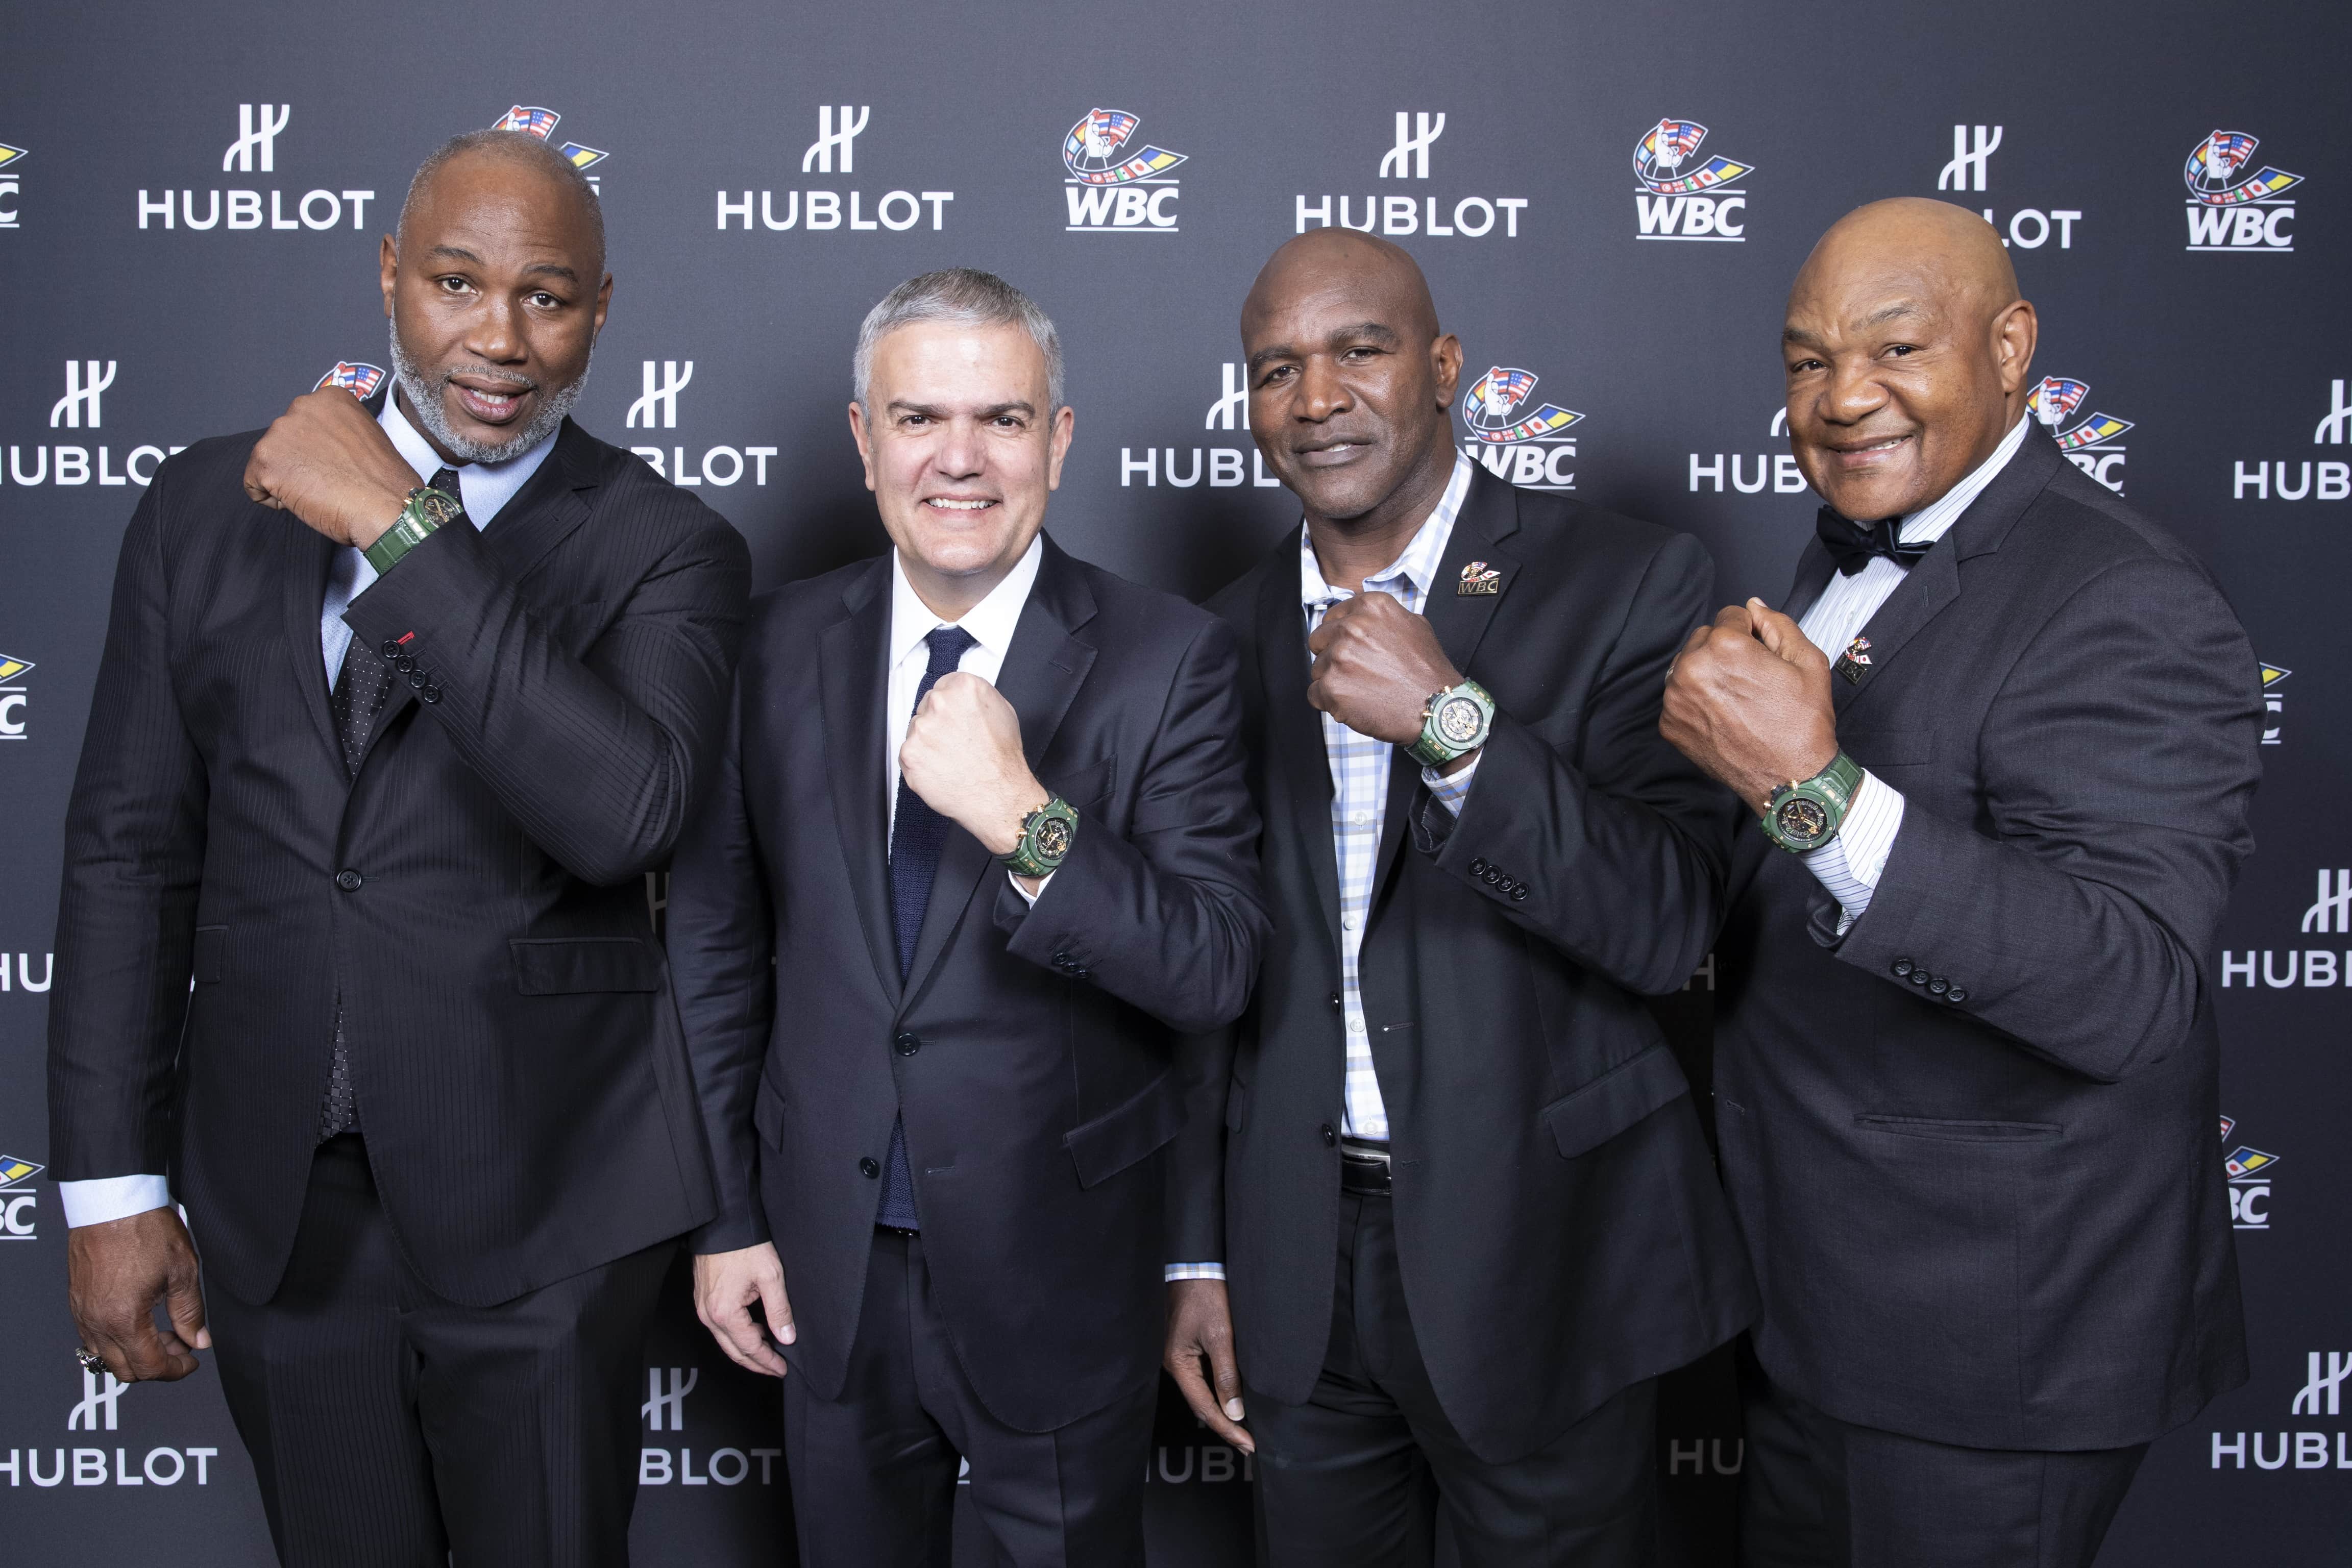 Hublot & WBC Bring Together World Champion Boxers For Legendary ‘Night Of Champions’ Gala & Auction